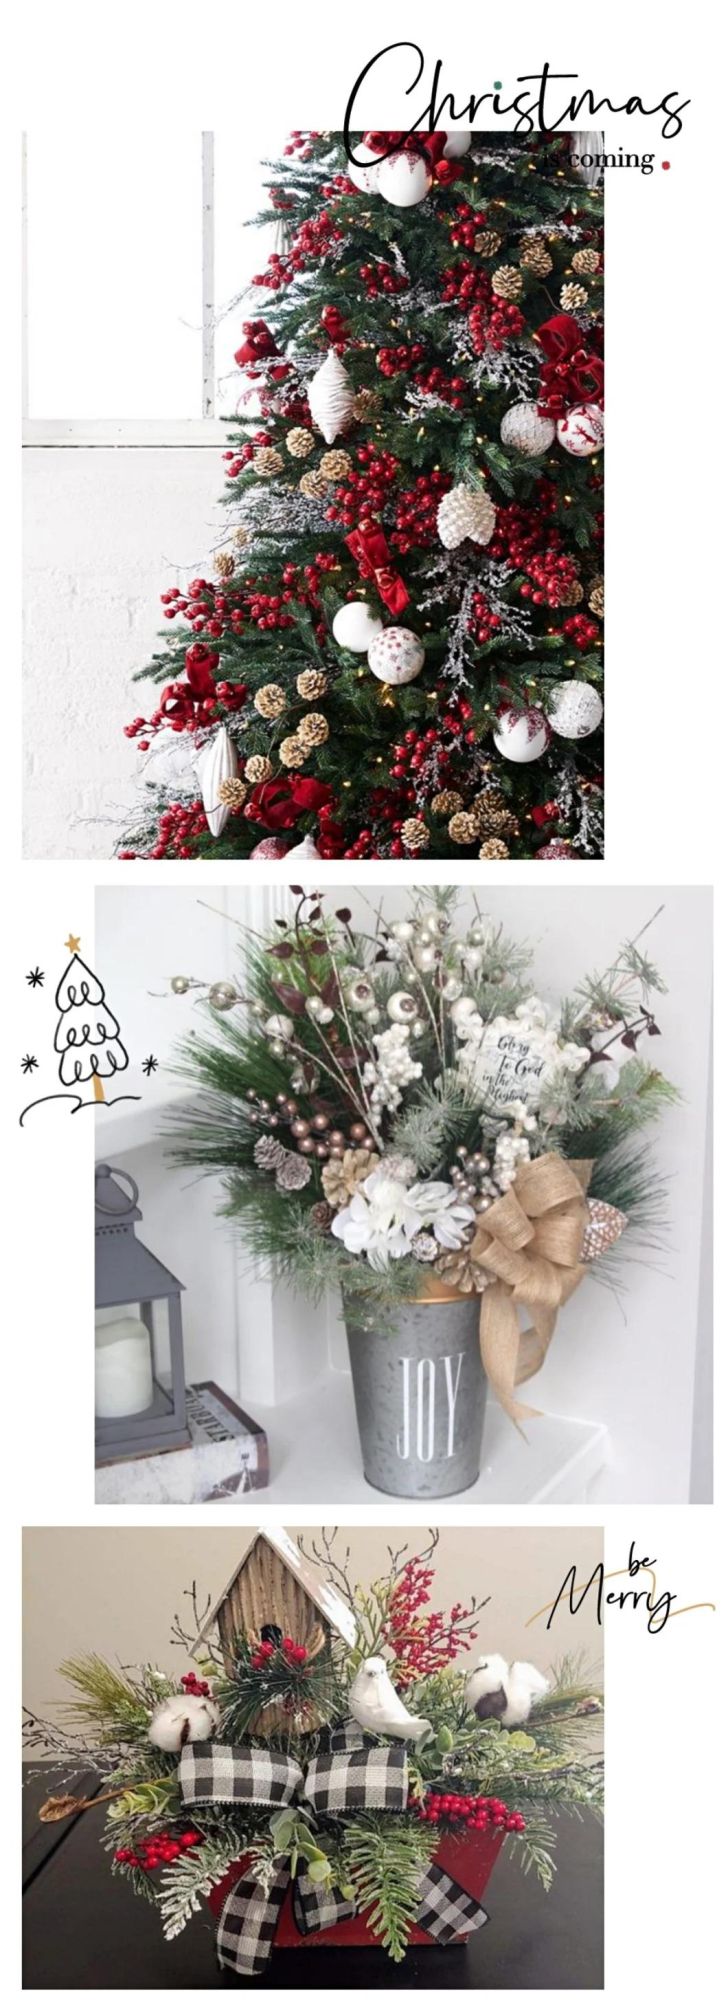 Artificial Flower 20cm Christmas Pick with Pine Cone and White Berries